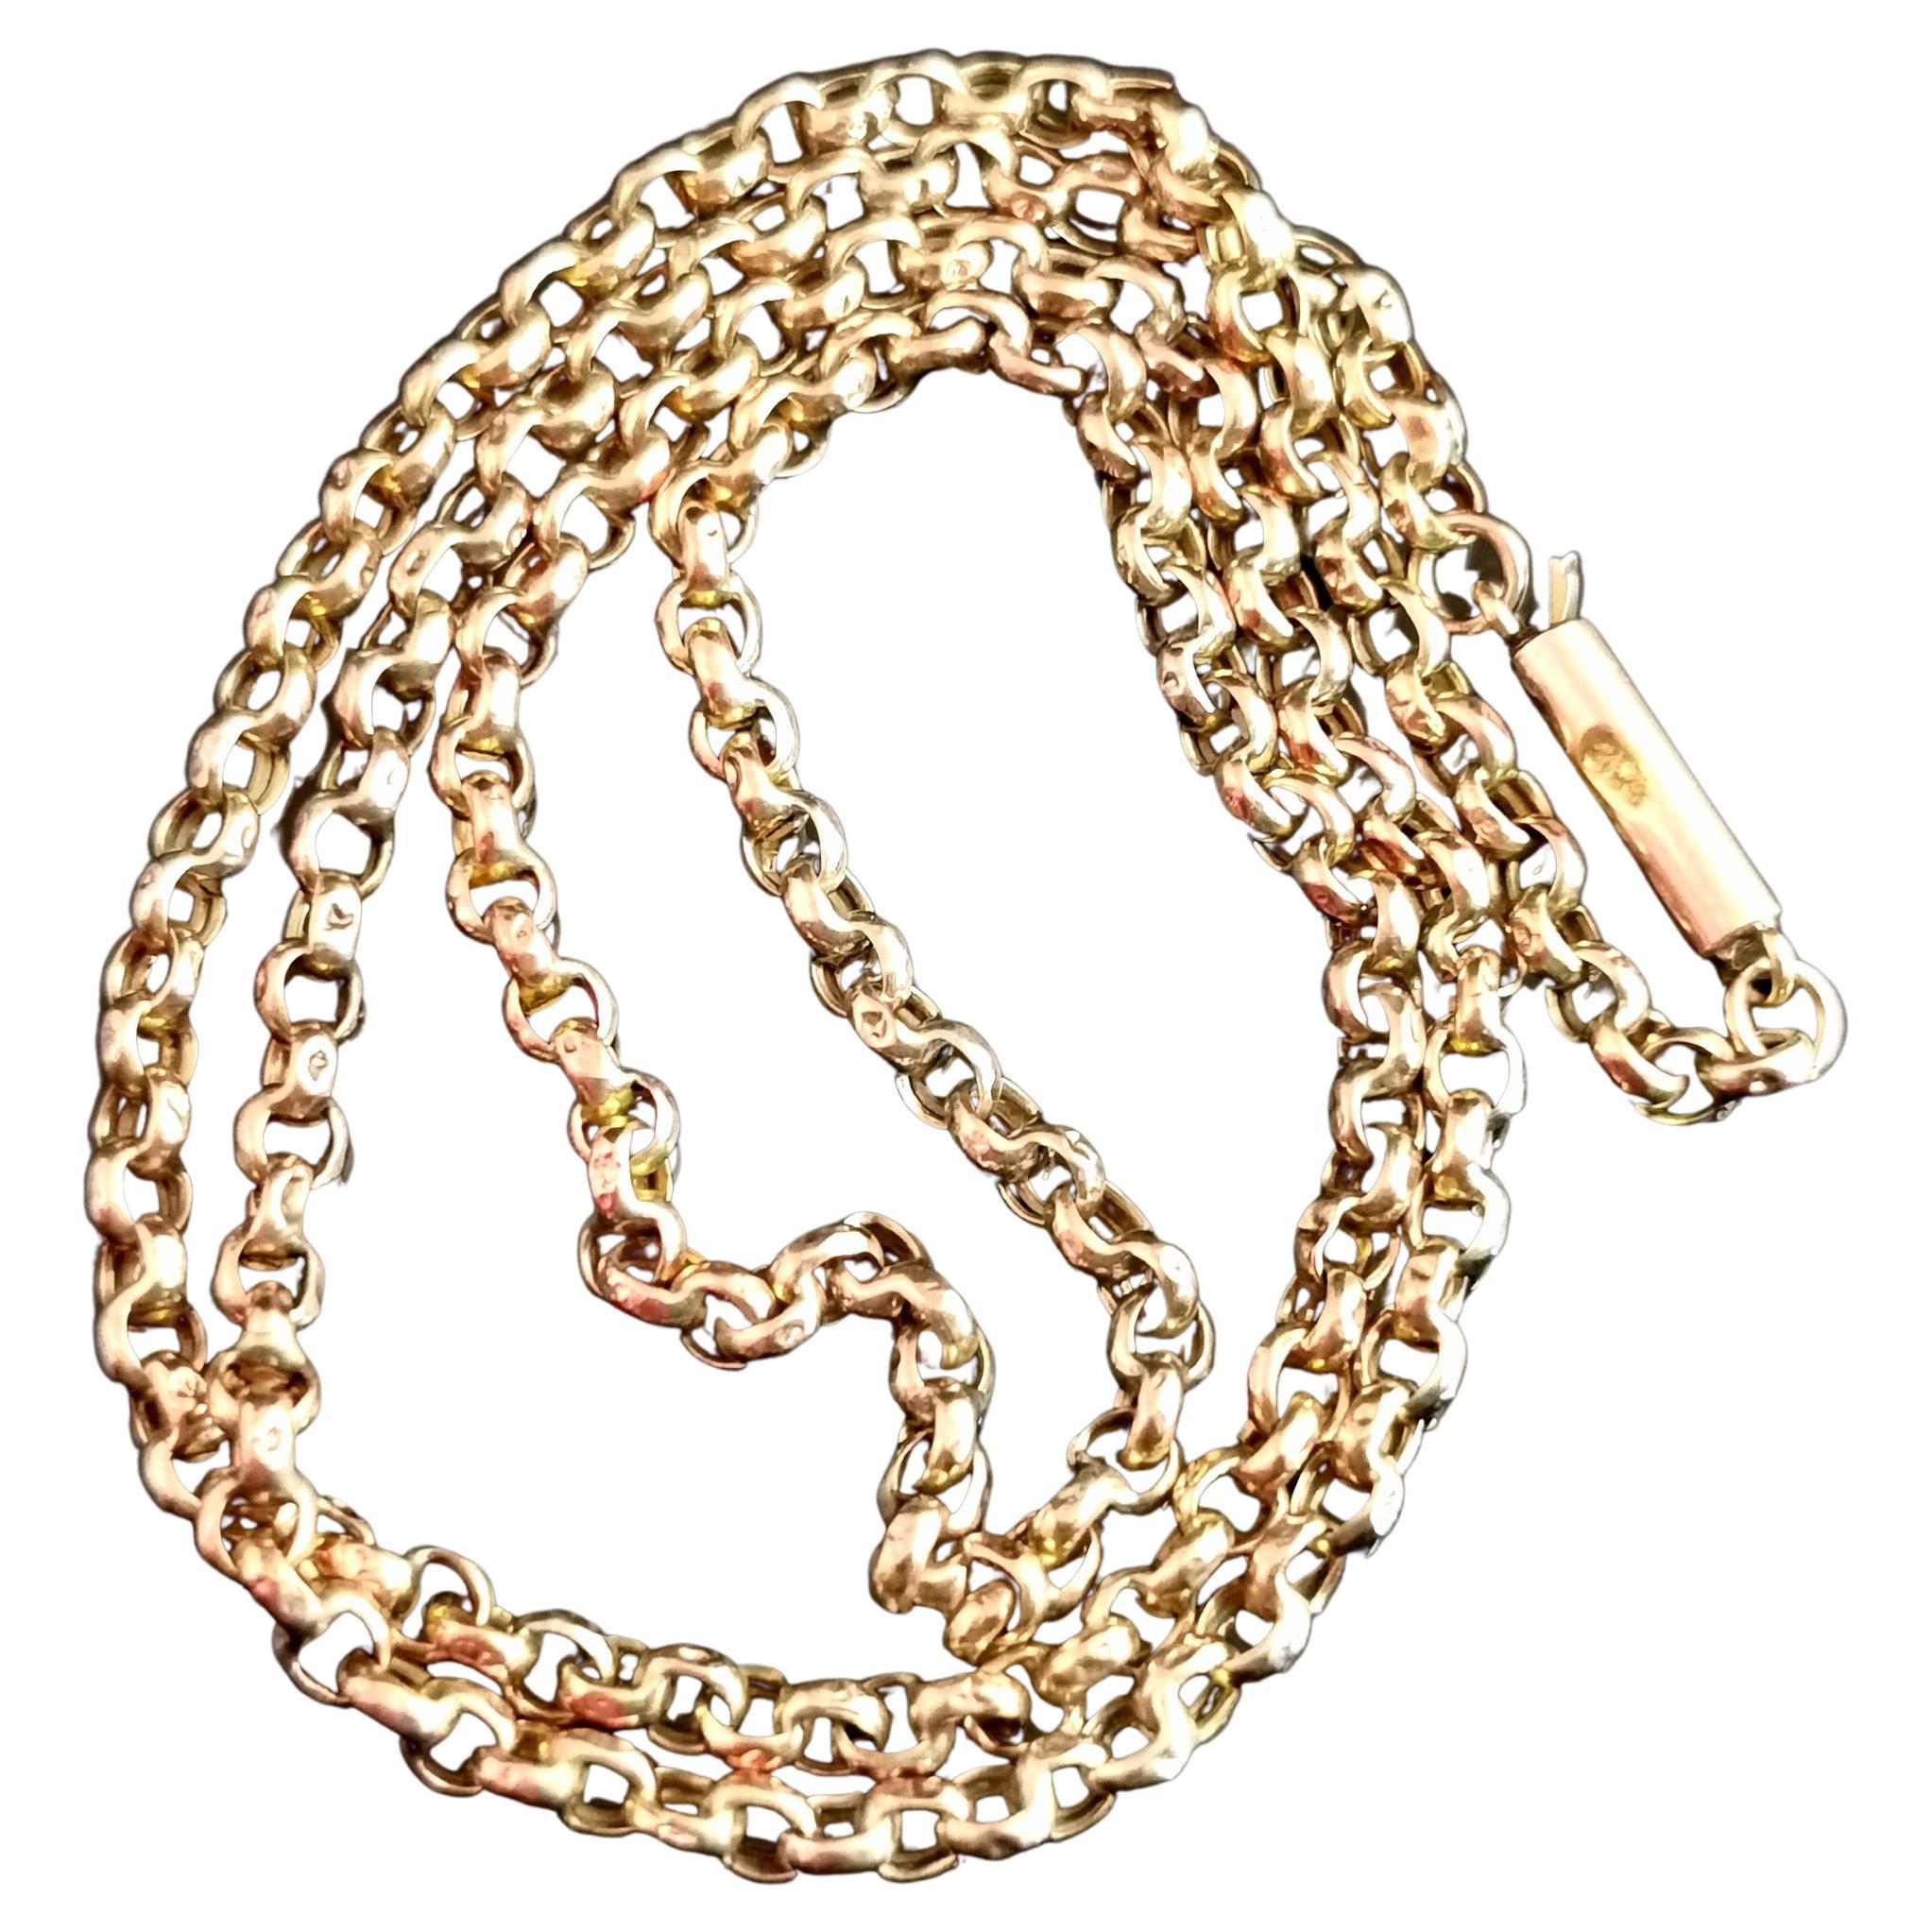 Antique 9k yellow gold rolo link chain necklace, Edwardian era 